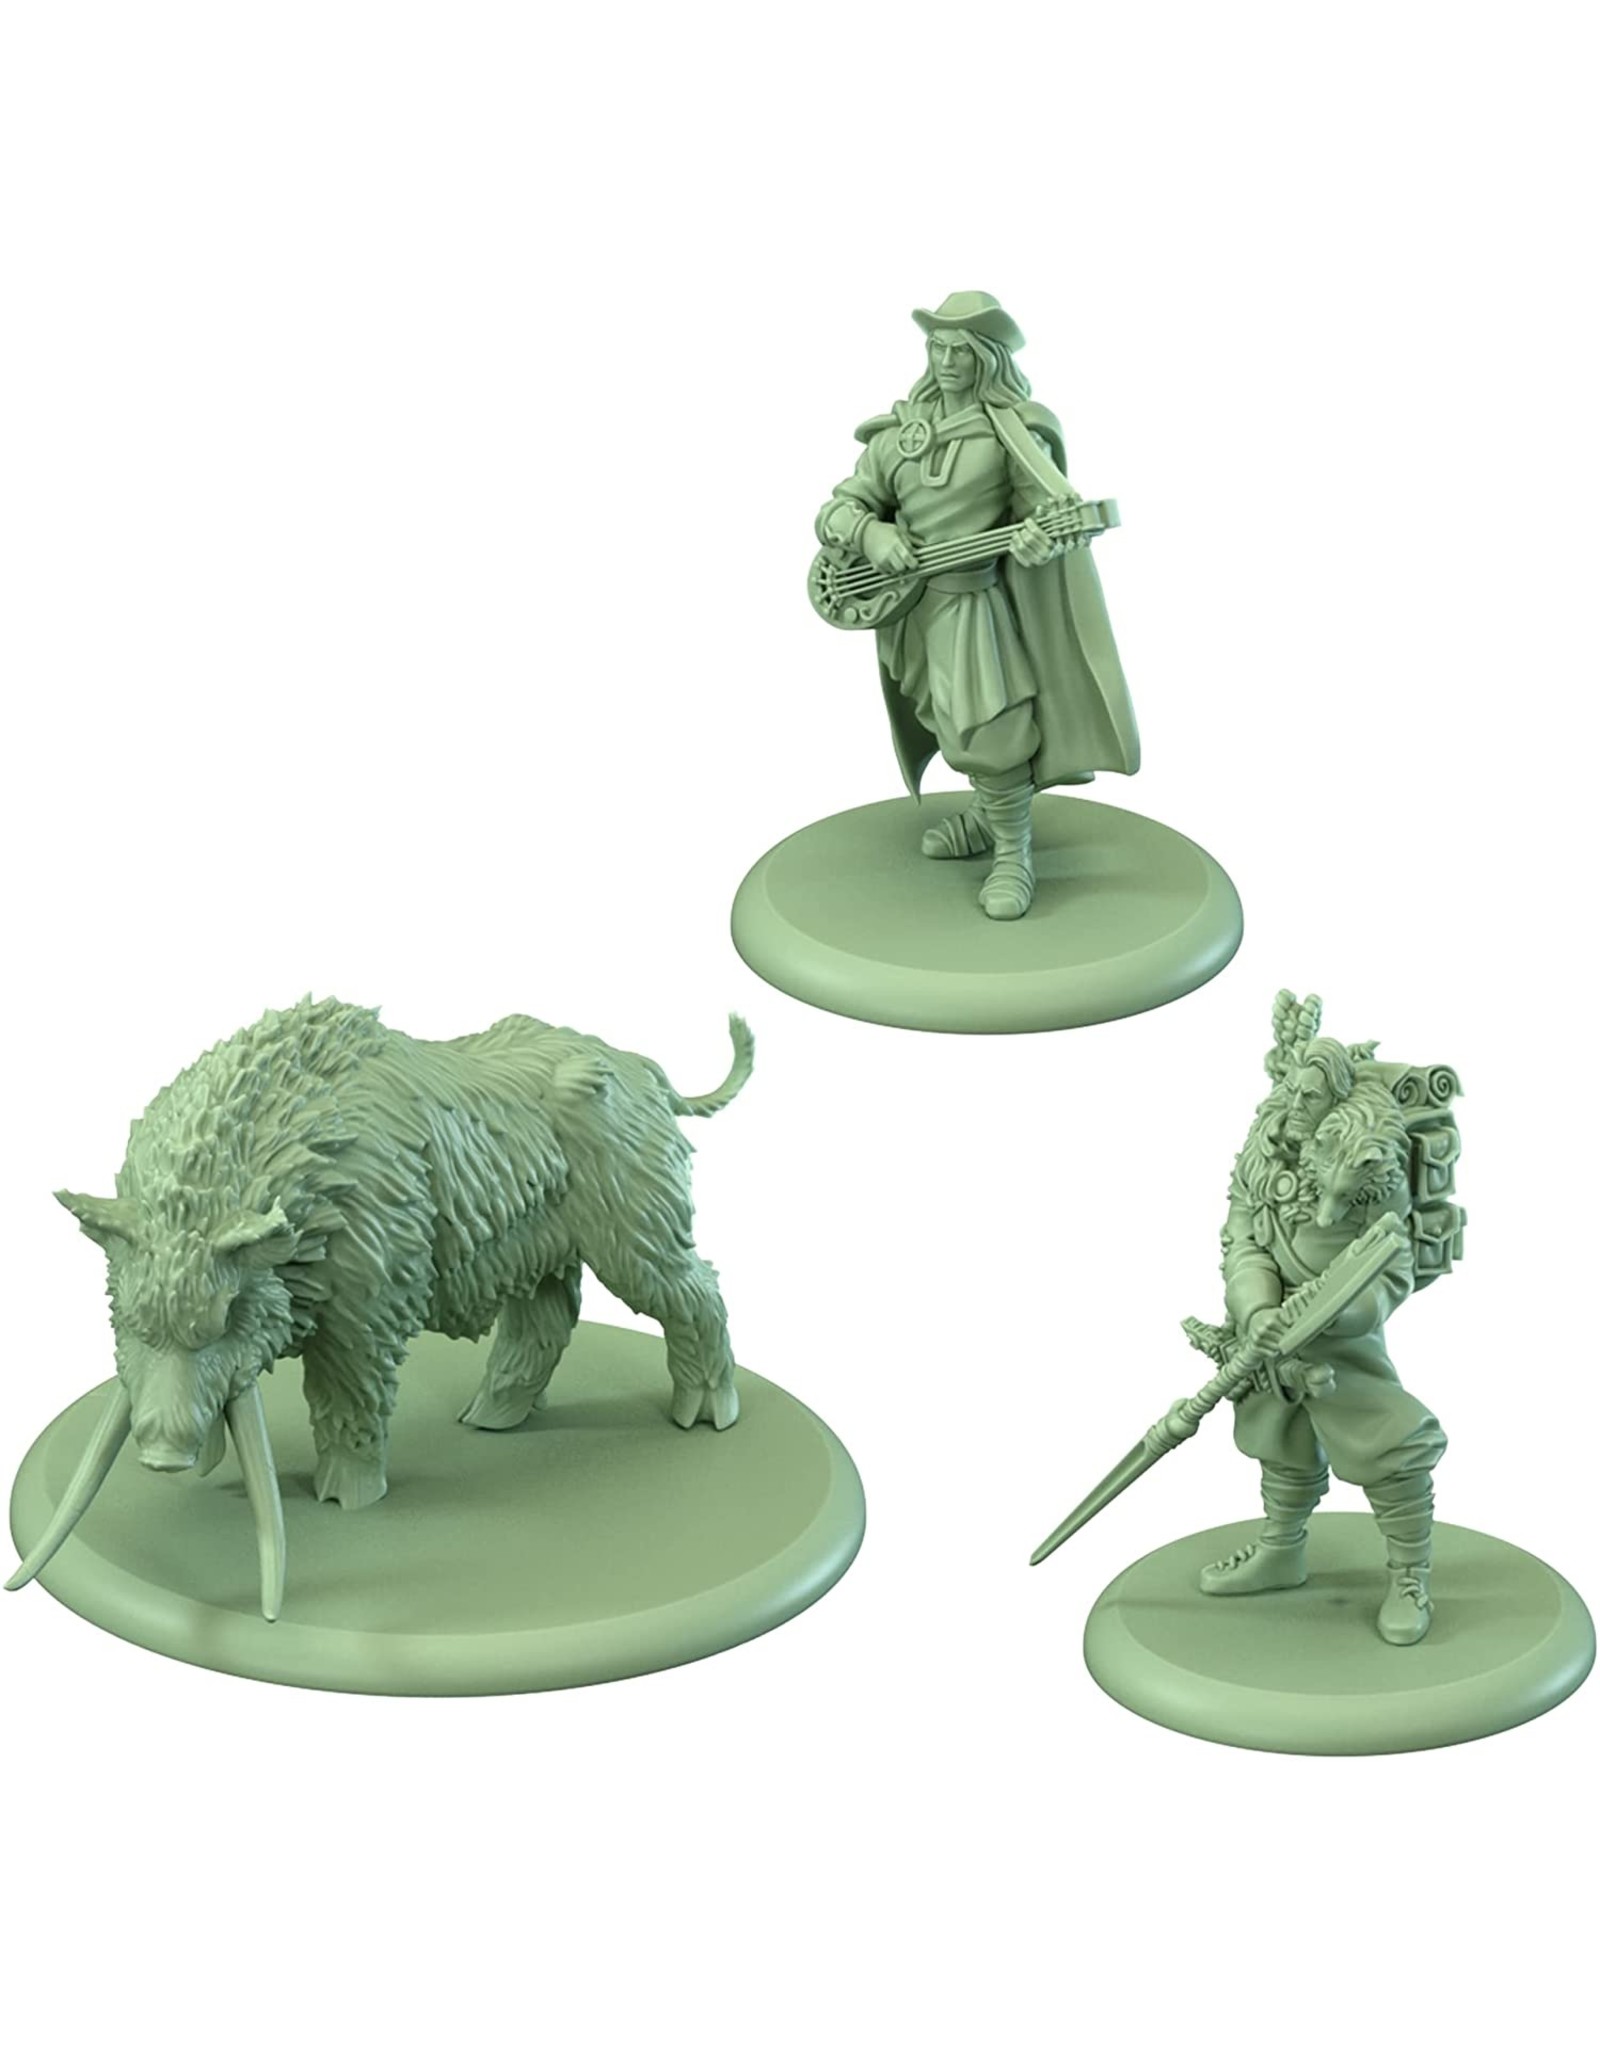 Cool Mini or Not A Song of Ice & Fire Tabletop Miniatures Game: FREE FOLK HEROES 3